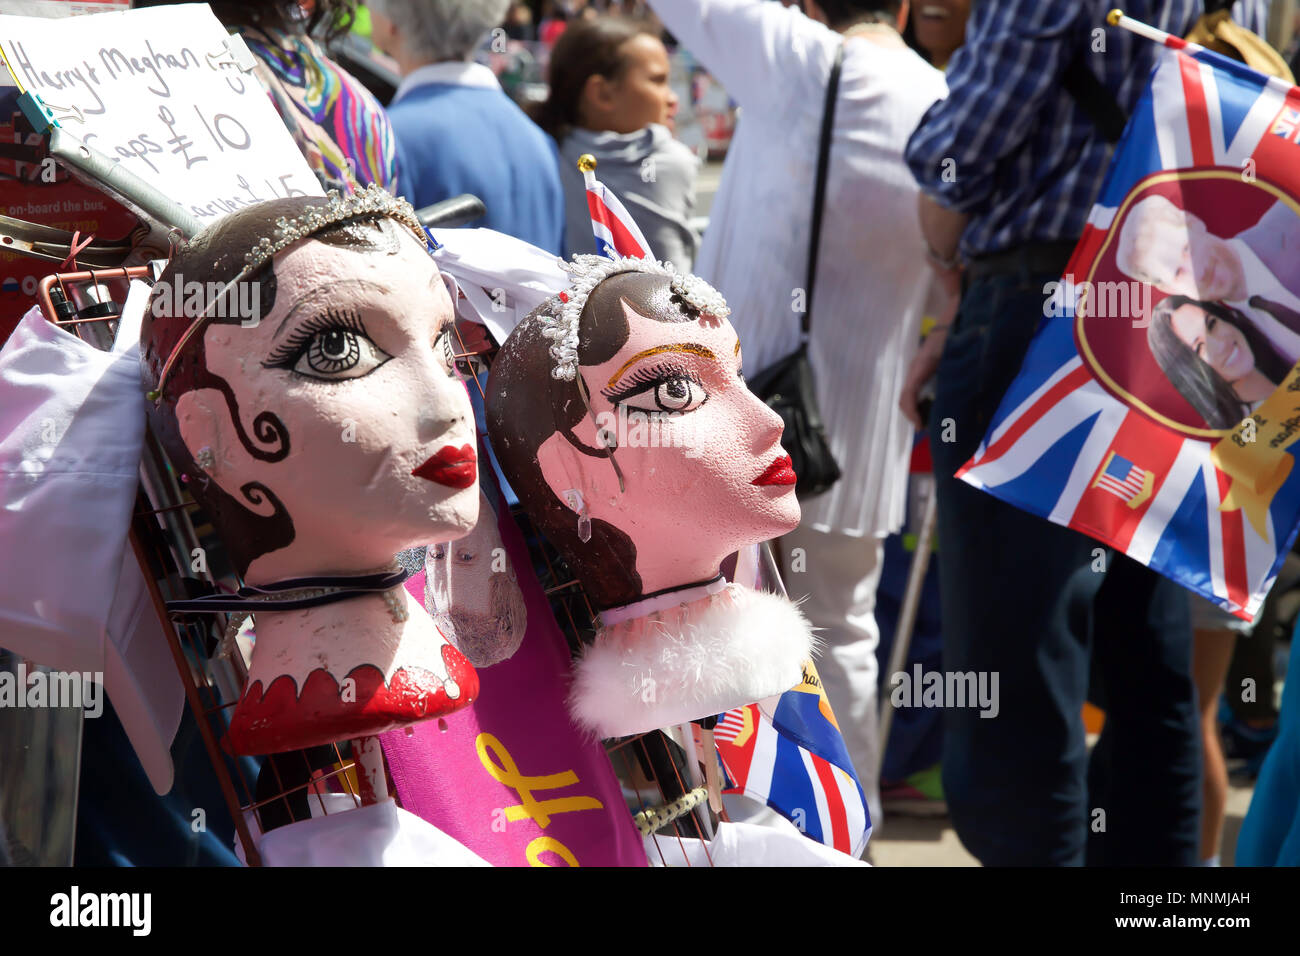 Windsor,UK,18th May 2018,The Royal Wedding preparations get underway as excitement builds in Windsor ahead of the marriage tomorrow of Prince Harry to Meghan Markle. There is an increased police presence and the shops are full of wedding souvenirs also lamp posts are adorned with union jack flags. Large crowds have descended on the town to soak up the atmosphere.Credit Keith Larby/Alamy Live News Stock Photo